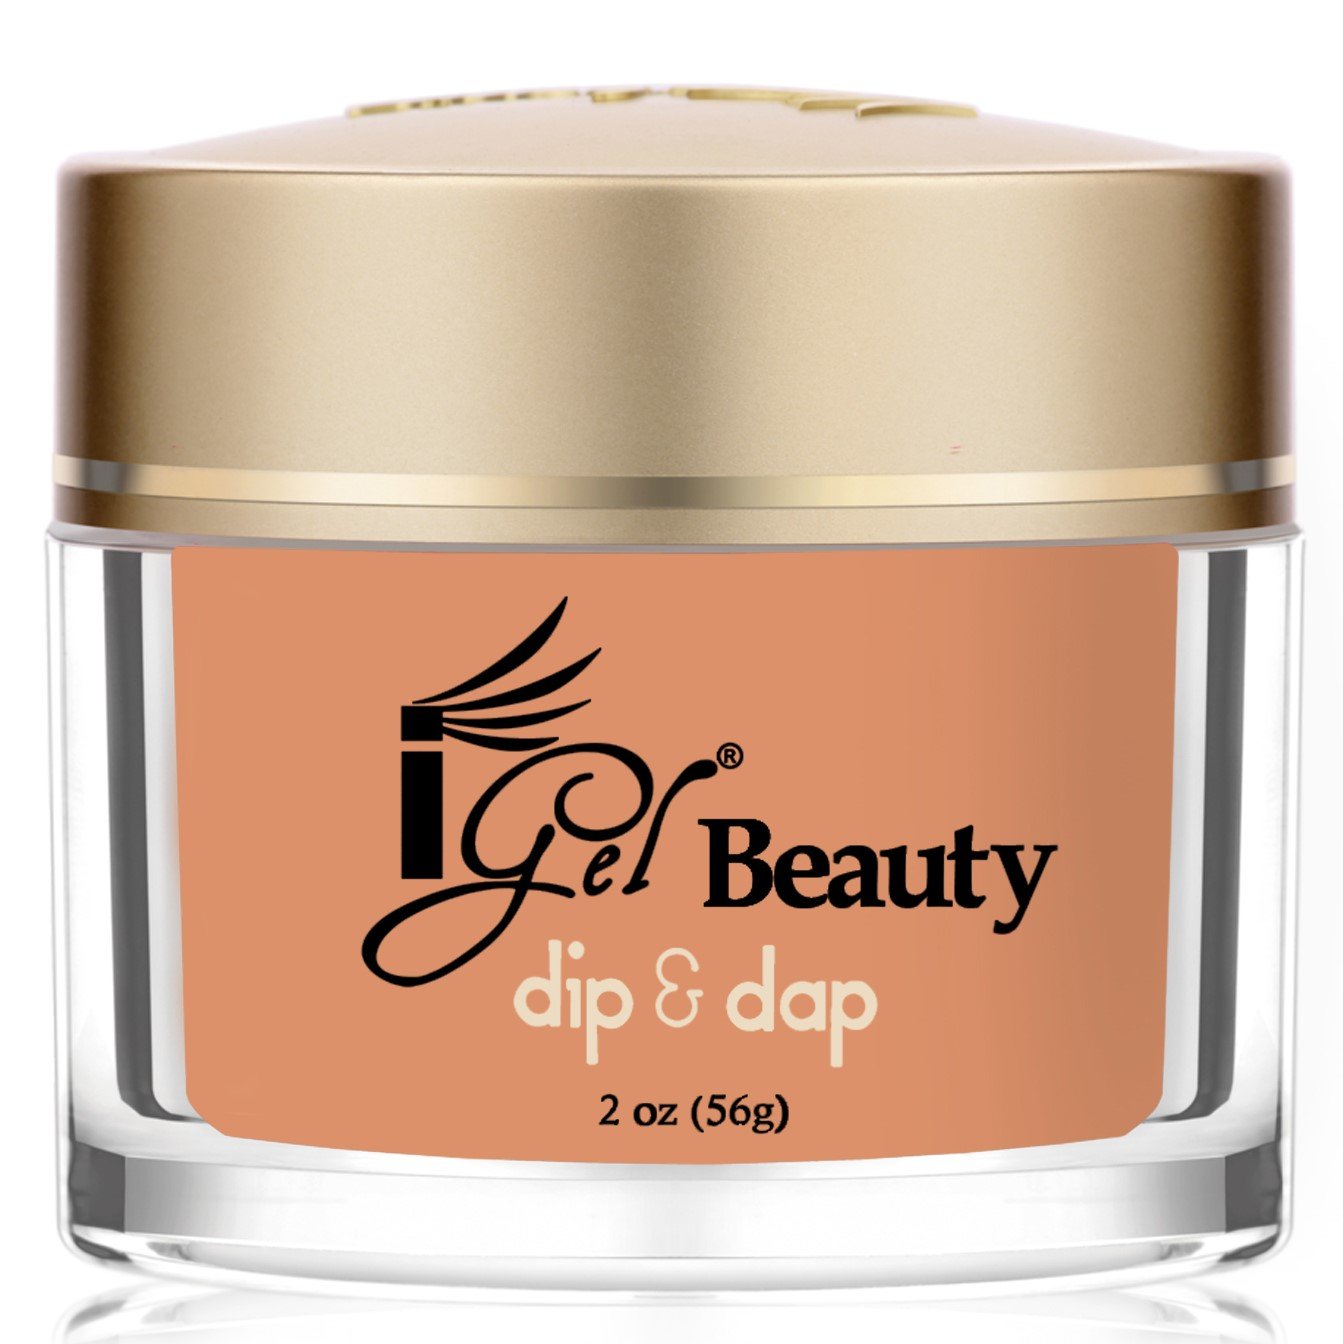 iGel Beauty - Dip & Dap Powder - DD026 Shy Pink - RECOMMENDED FOR DIP